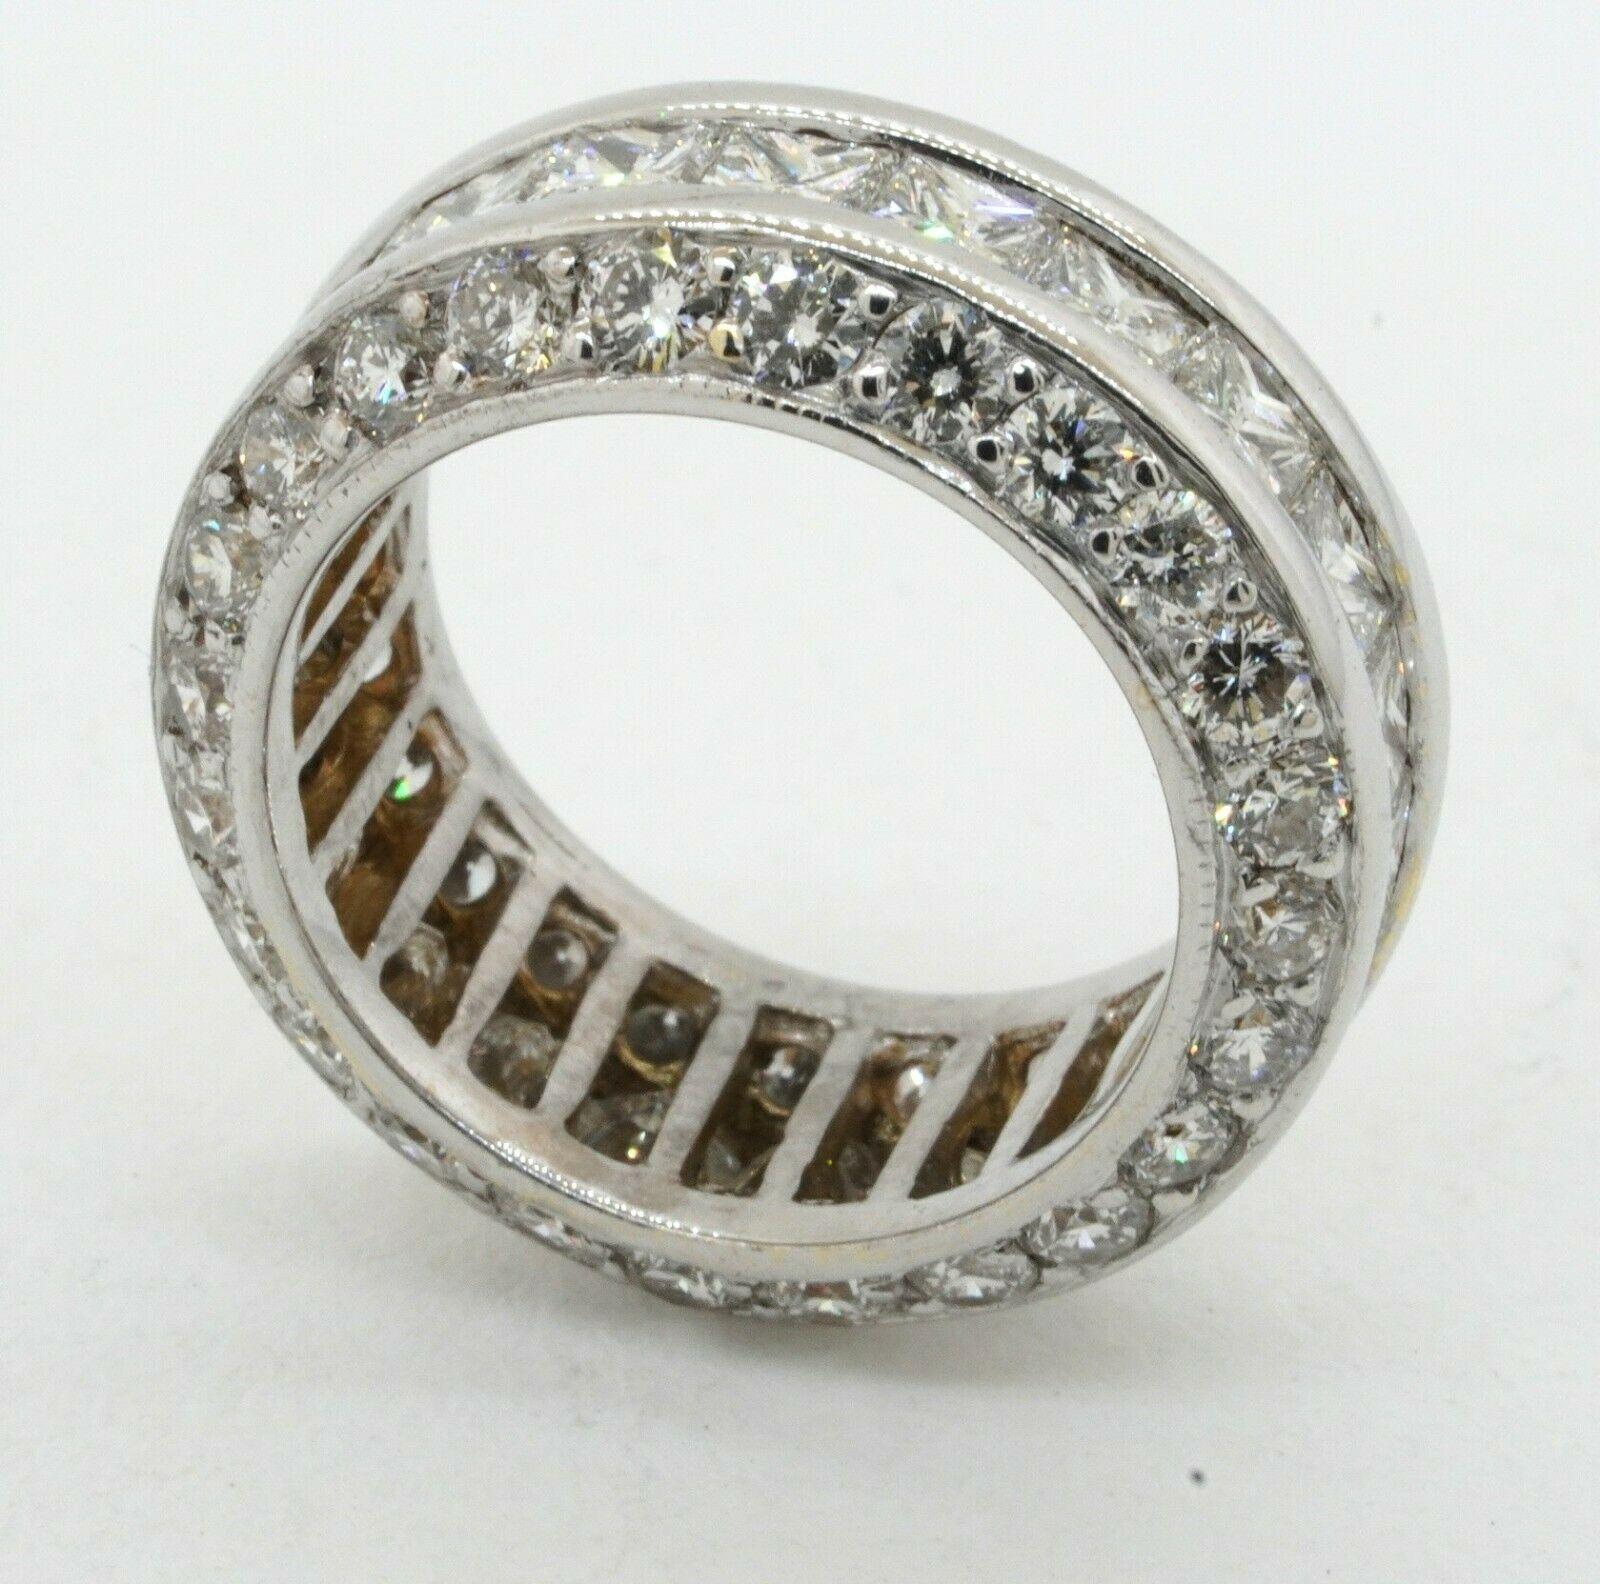 Heavy 18K white gold 5.88CT VS diamond cluster thick eternity band ring size 4.5. This fashionable piece of jewelry is crafted in beautiful 18K white gold and features multiple diamonds (Excellent VS1 - Above Average SI1 clarity/Colorless F - G